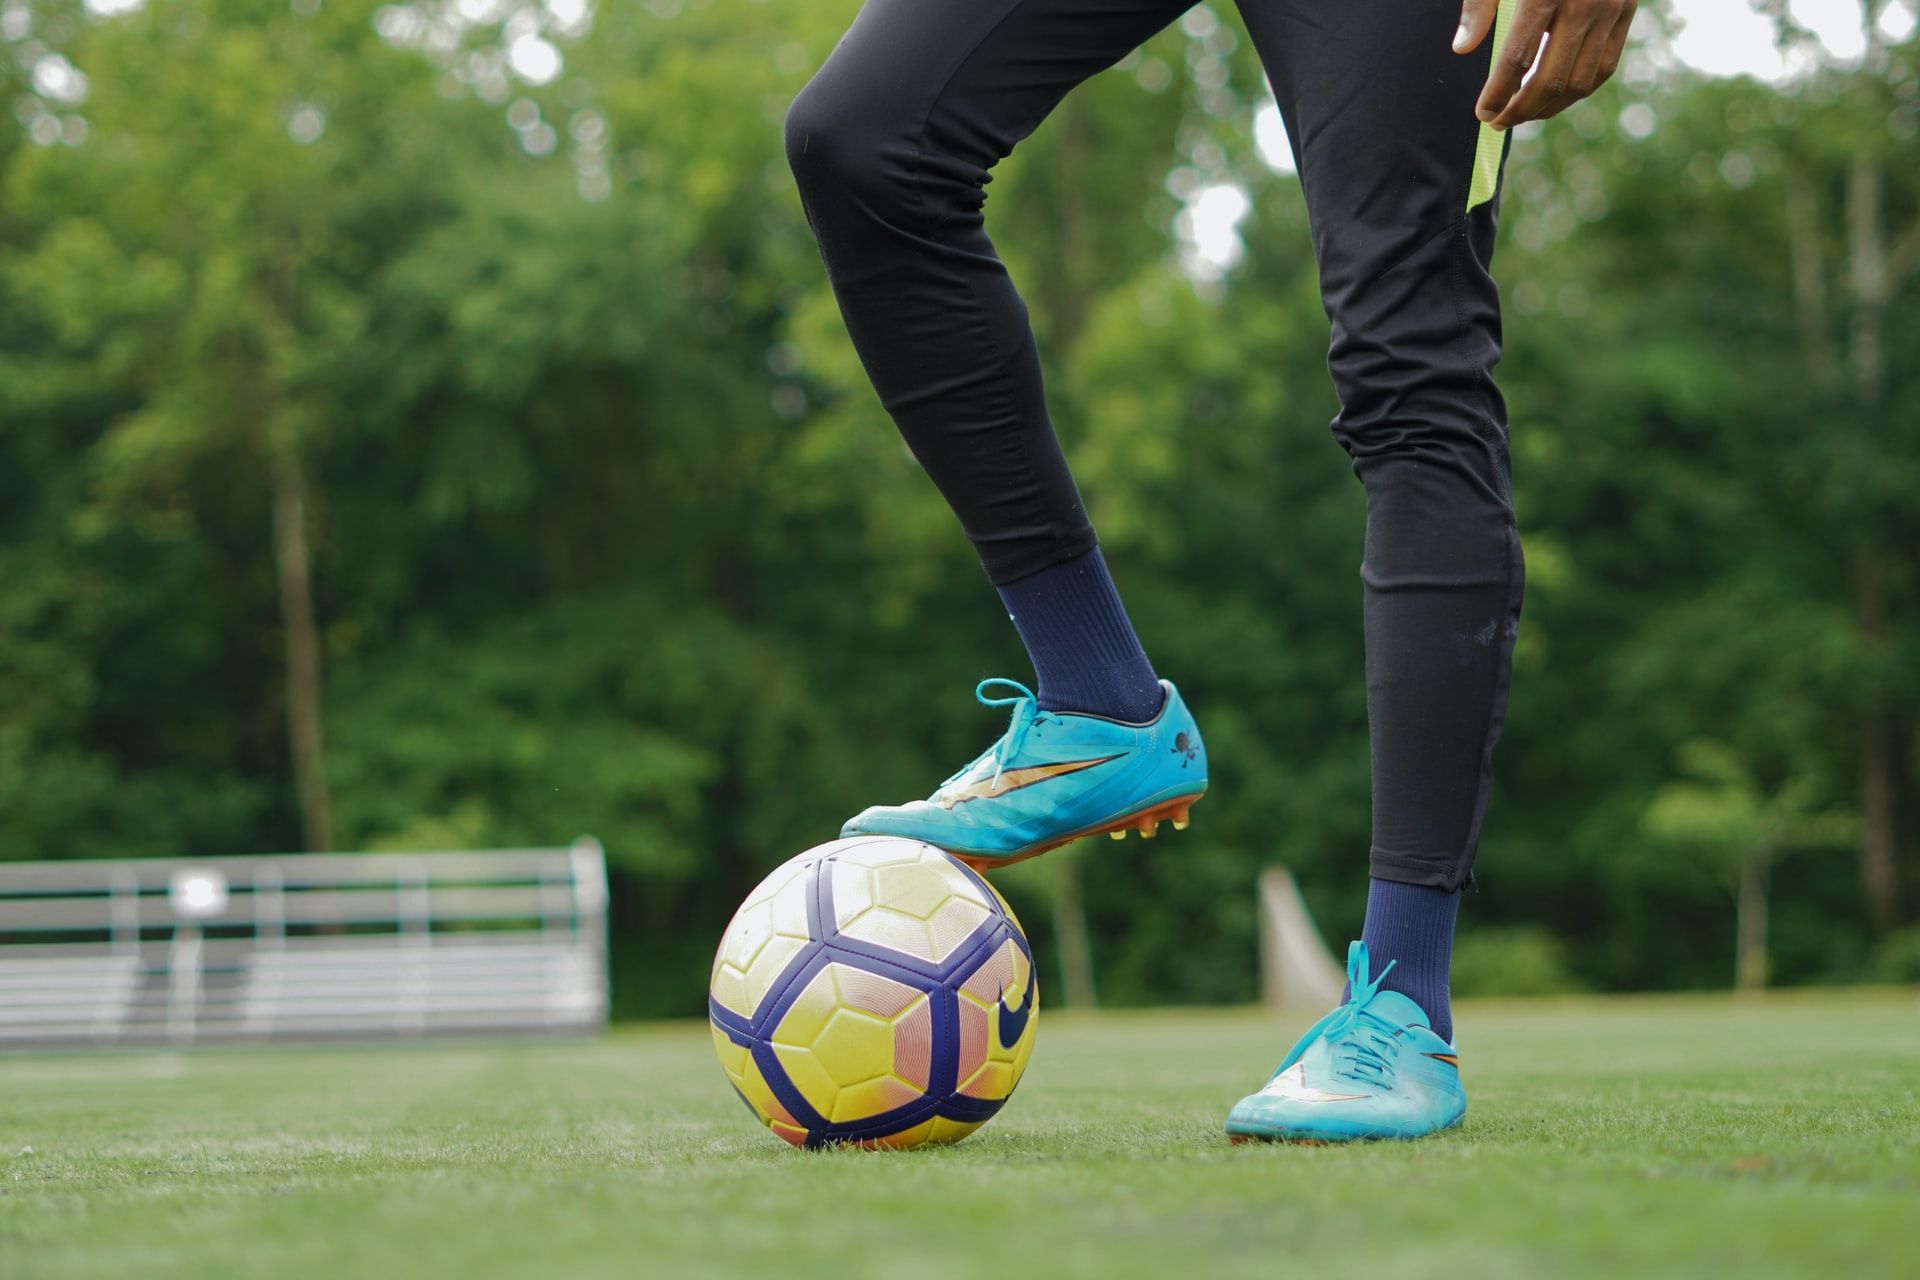 Can an ACL injury lead to arthritis in the future?